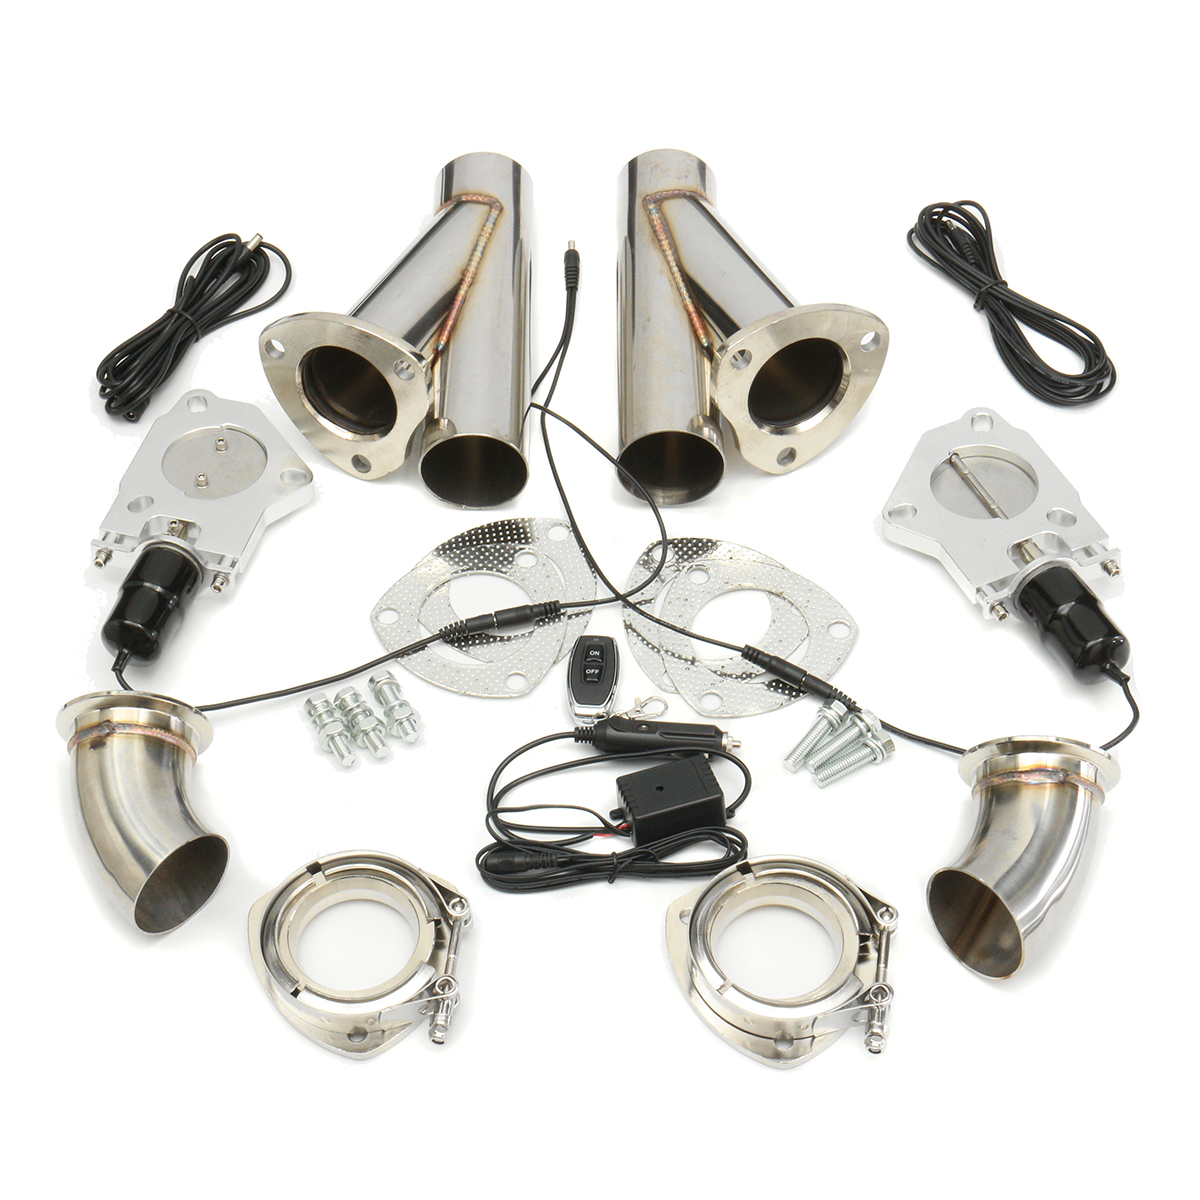 

2.5 Inch 6.3mm Dual Electric Exhaust Cutout Pipe Kit with Remote Control Stainless Steel Cutout Muffler Valve System